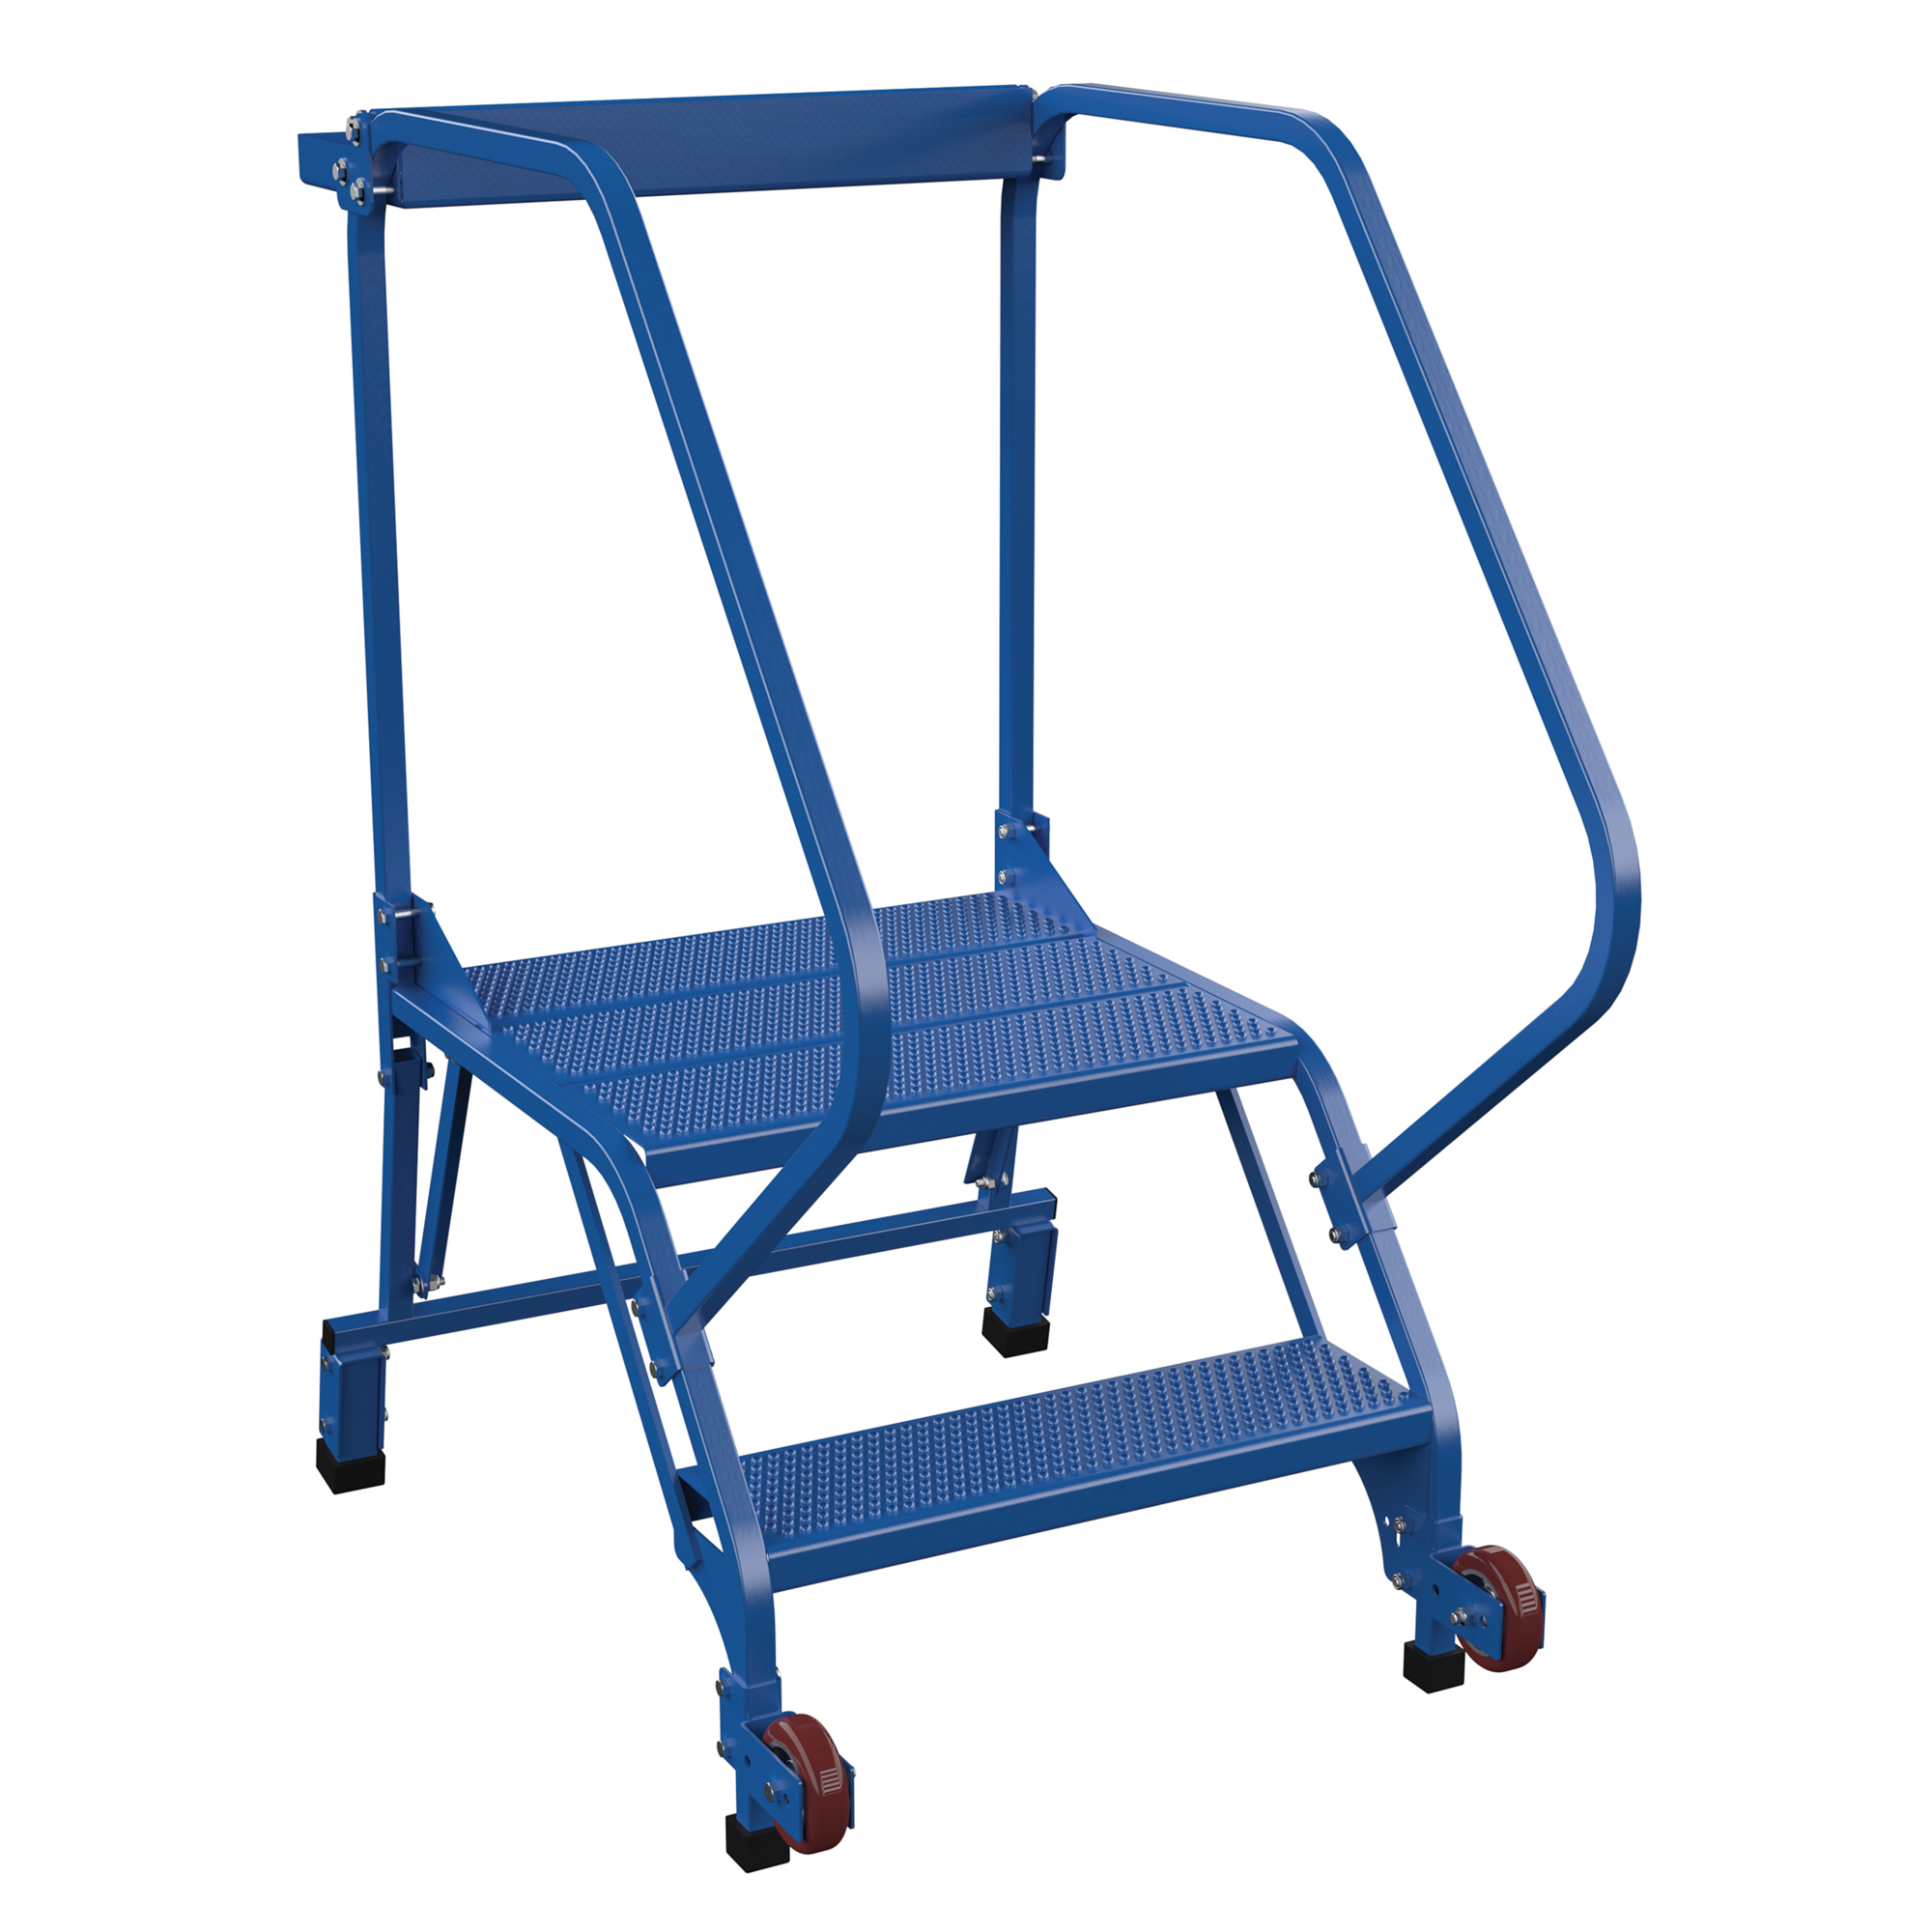 Vestil, 2 Step perforated rolling ladder, Overall Height 50 in, Steps 2 Material Steel, Model LAD-TRS-50-2-P